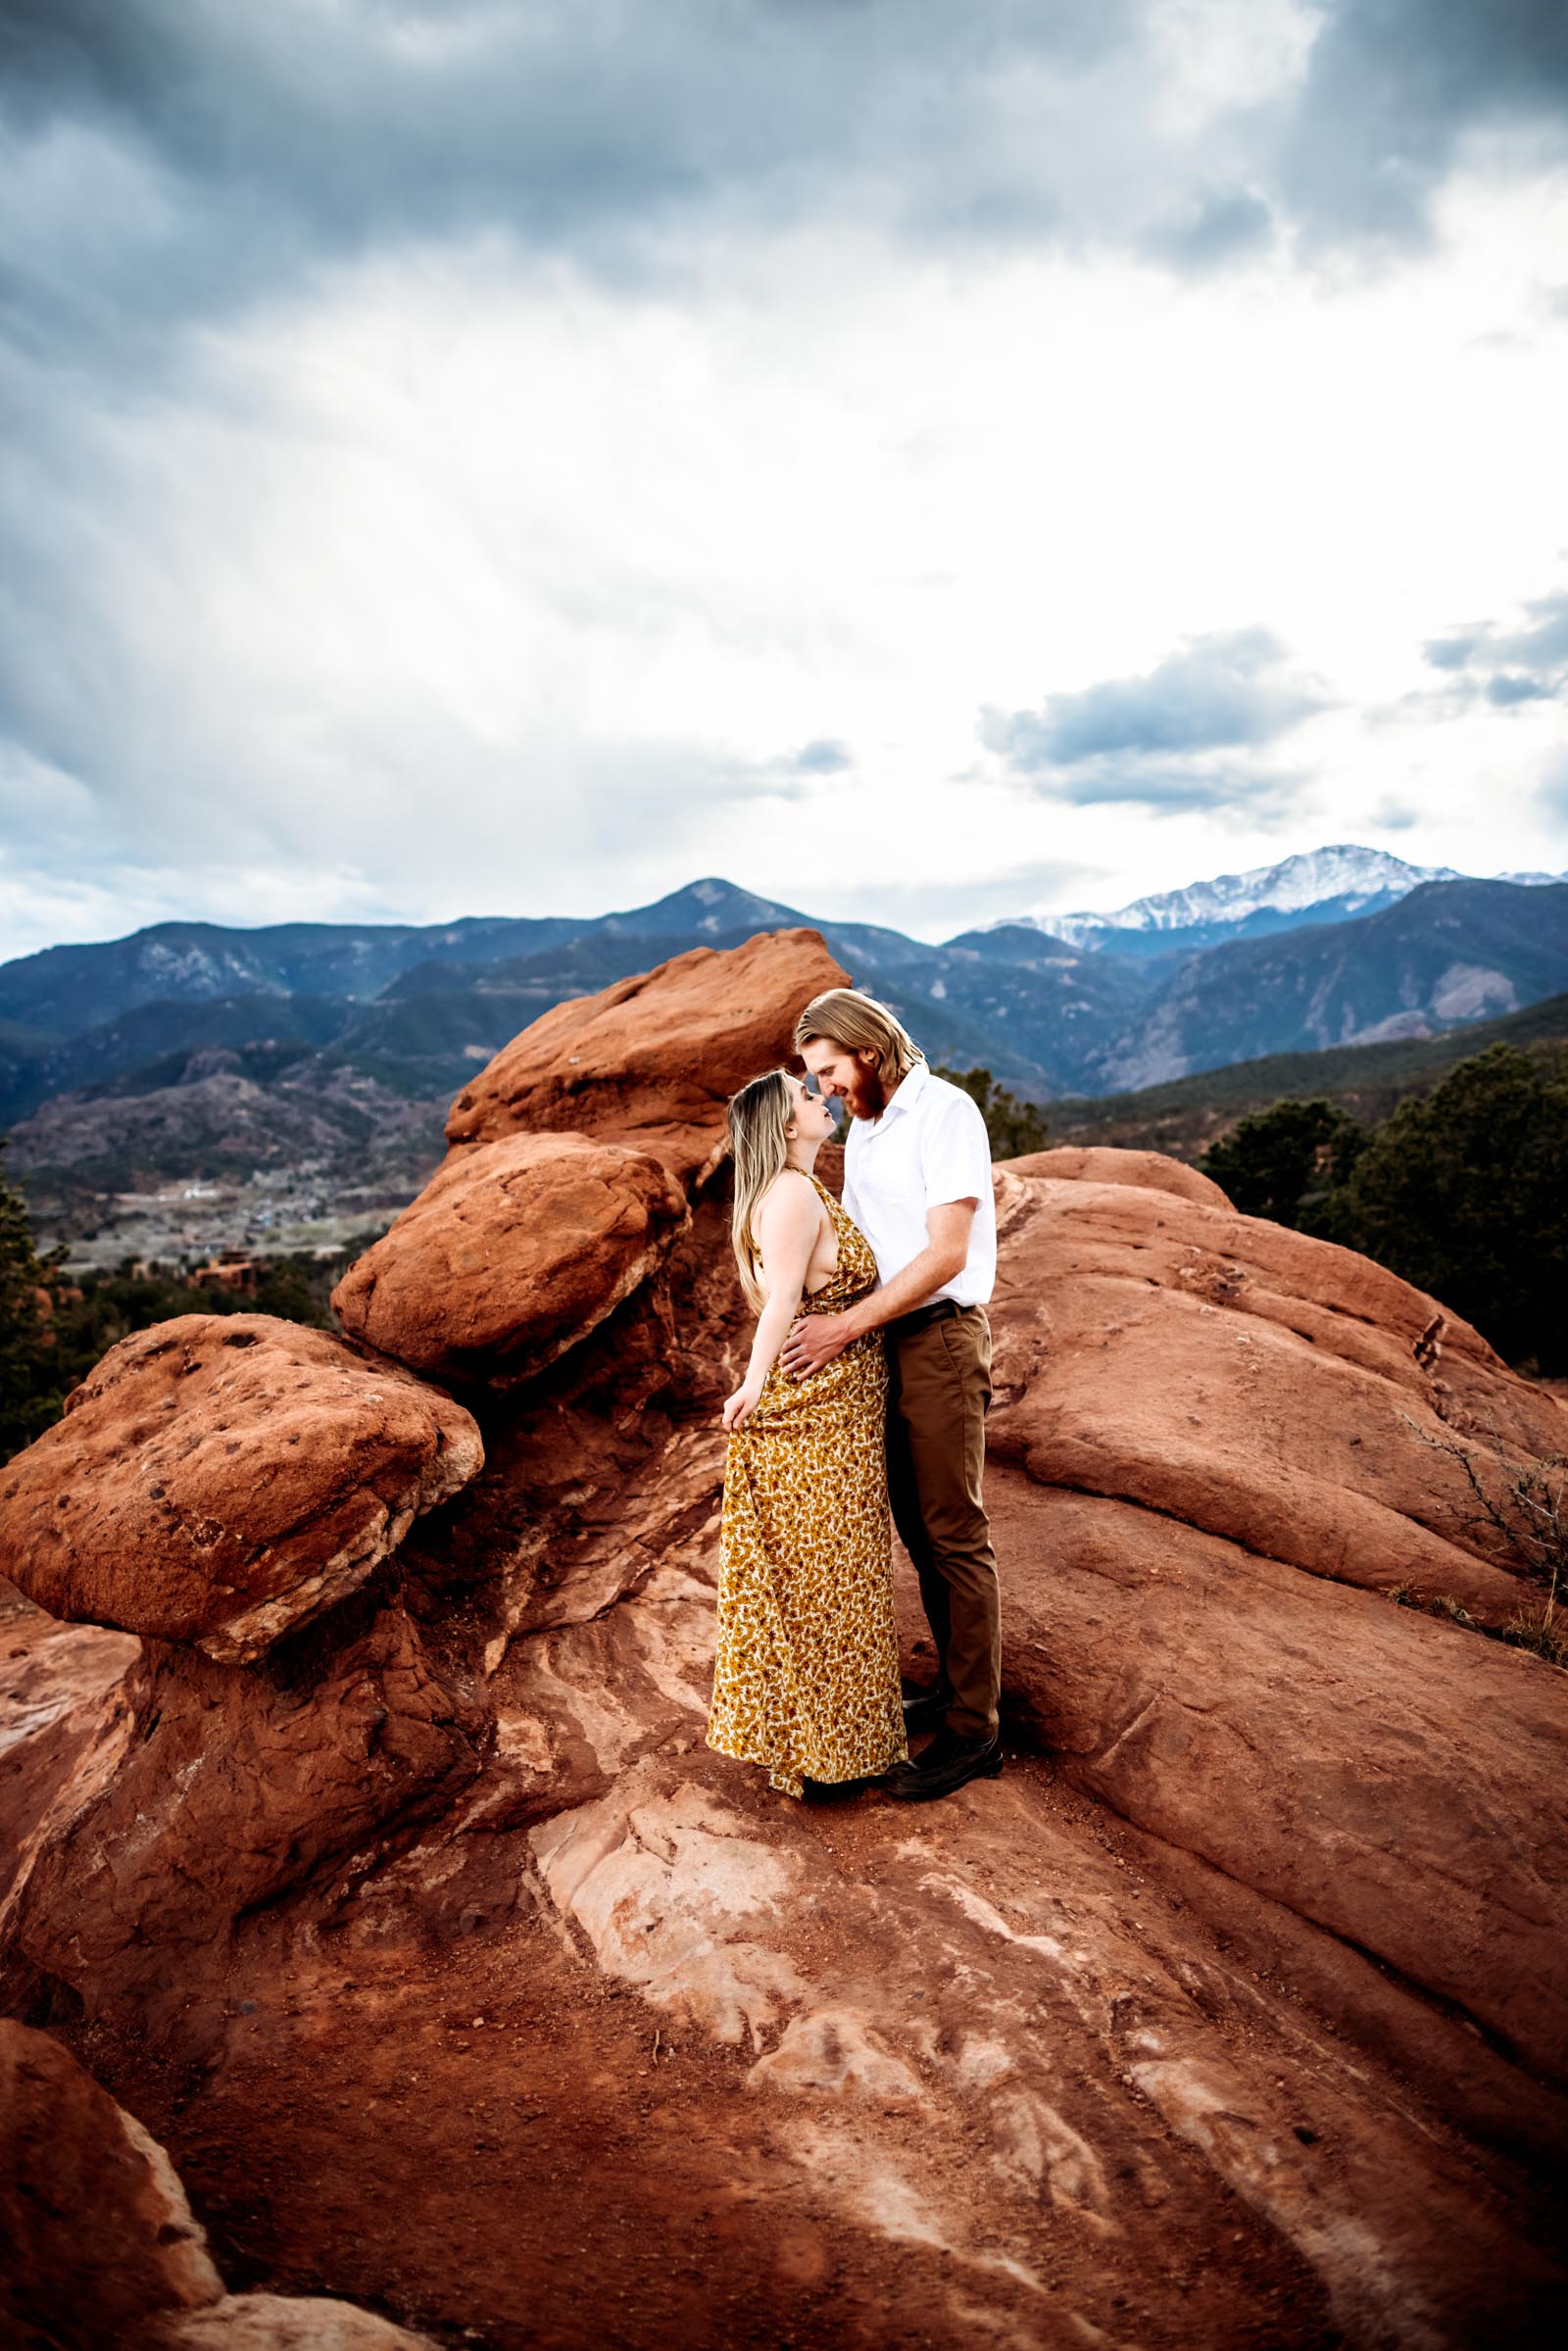 Garden of the Gods Couples photo session